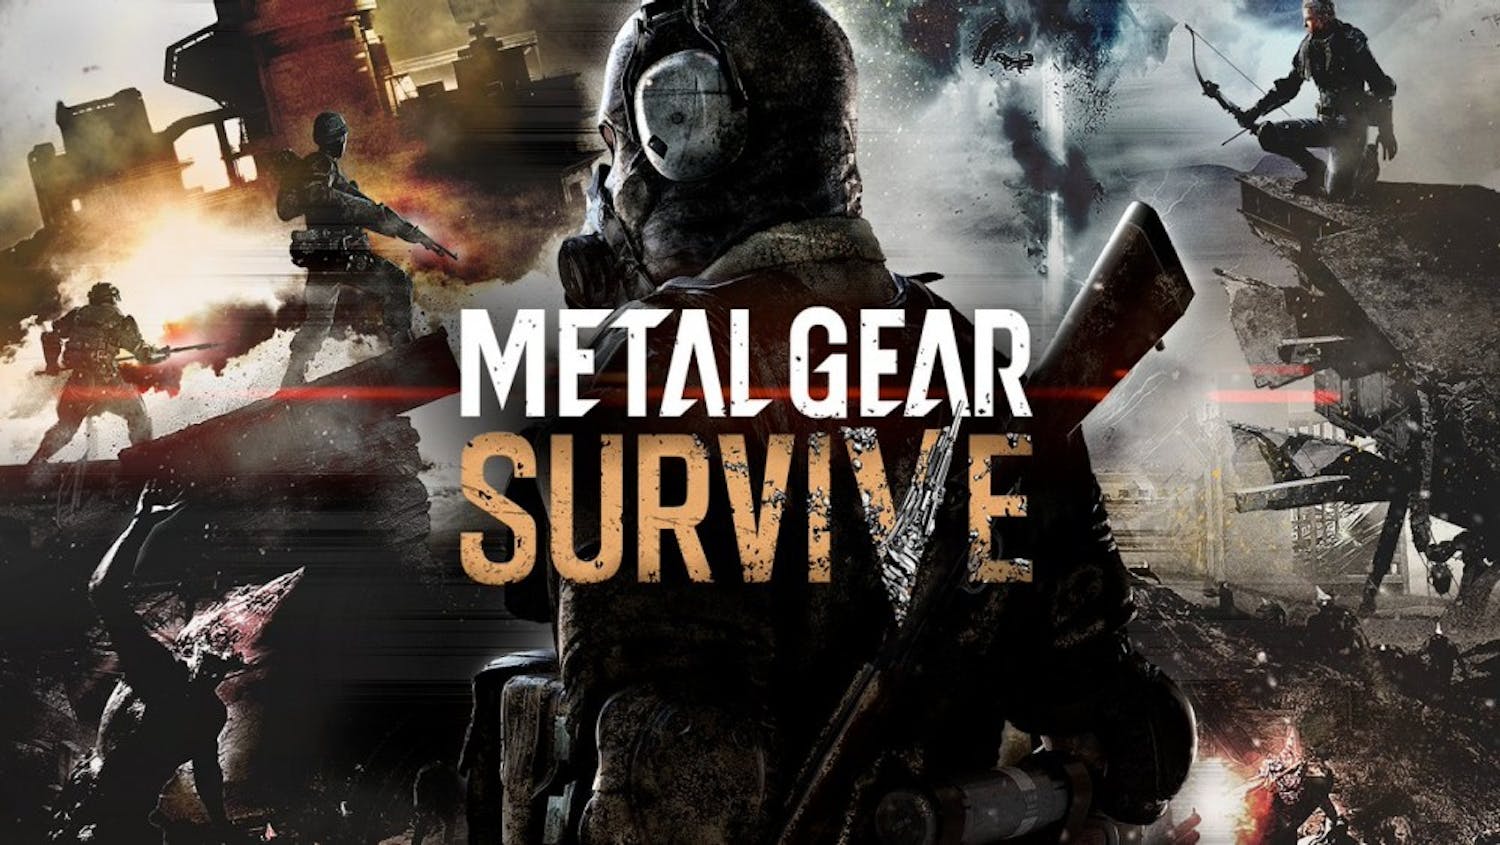 "Metal Gear Survive" is now available for PS4, Xbox One and PC.